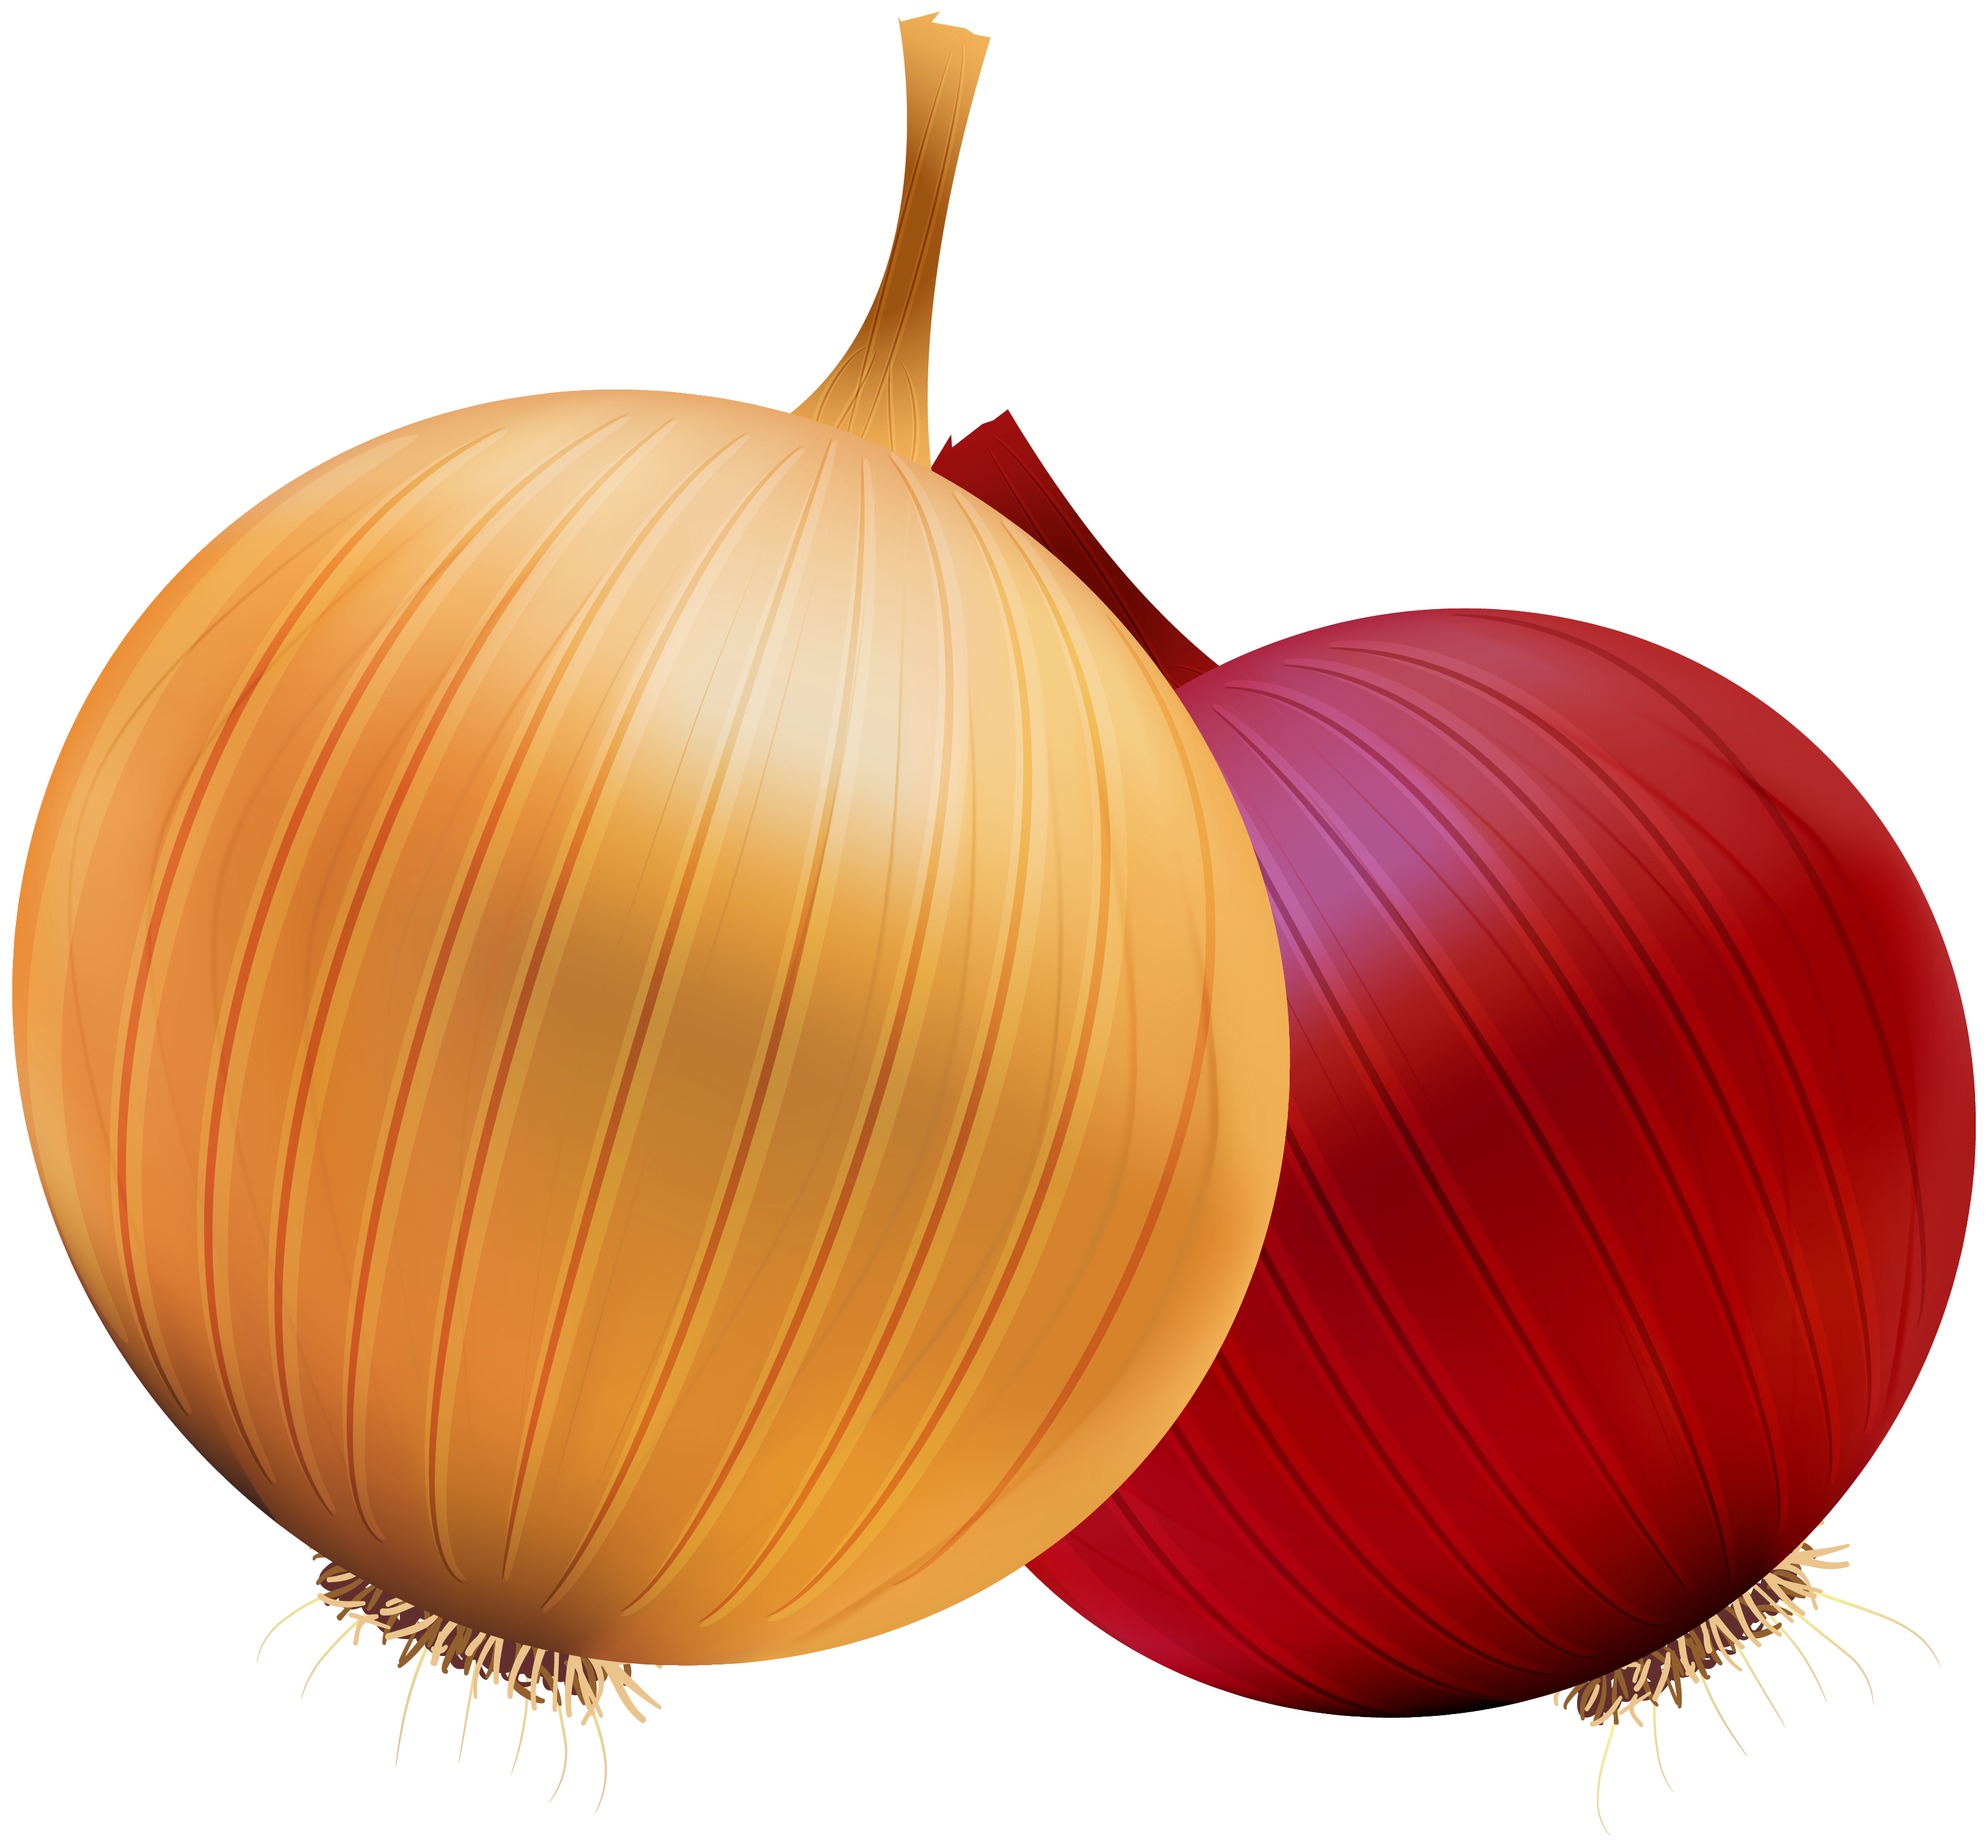 Onion and red png. Fish clipart vegetable